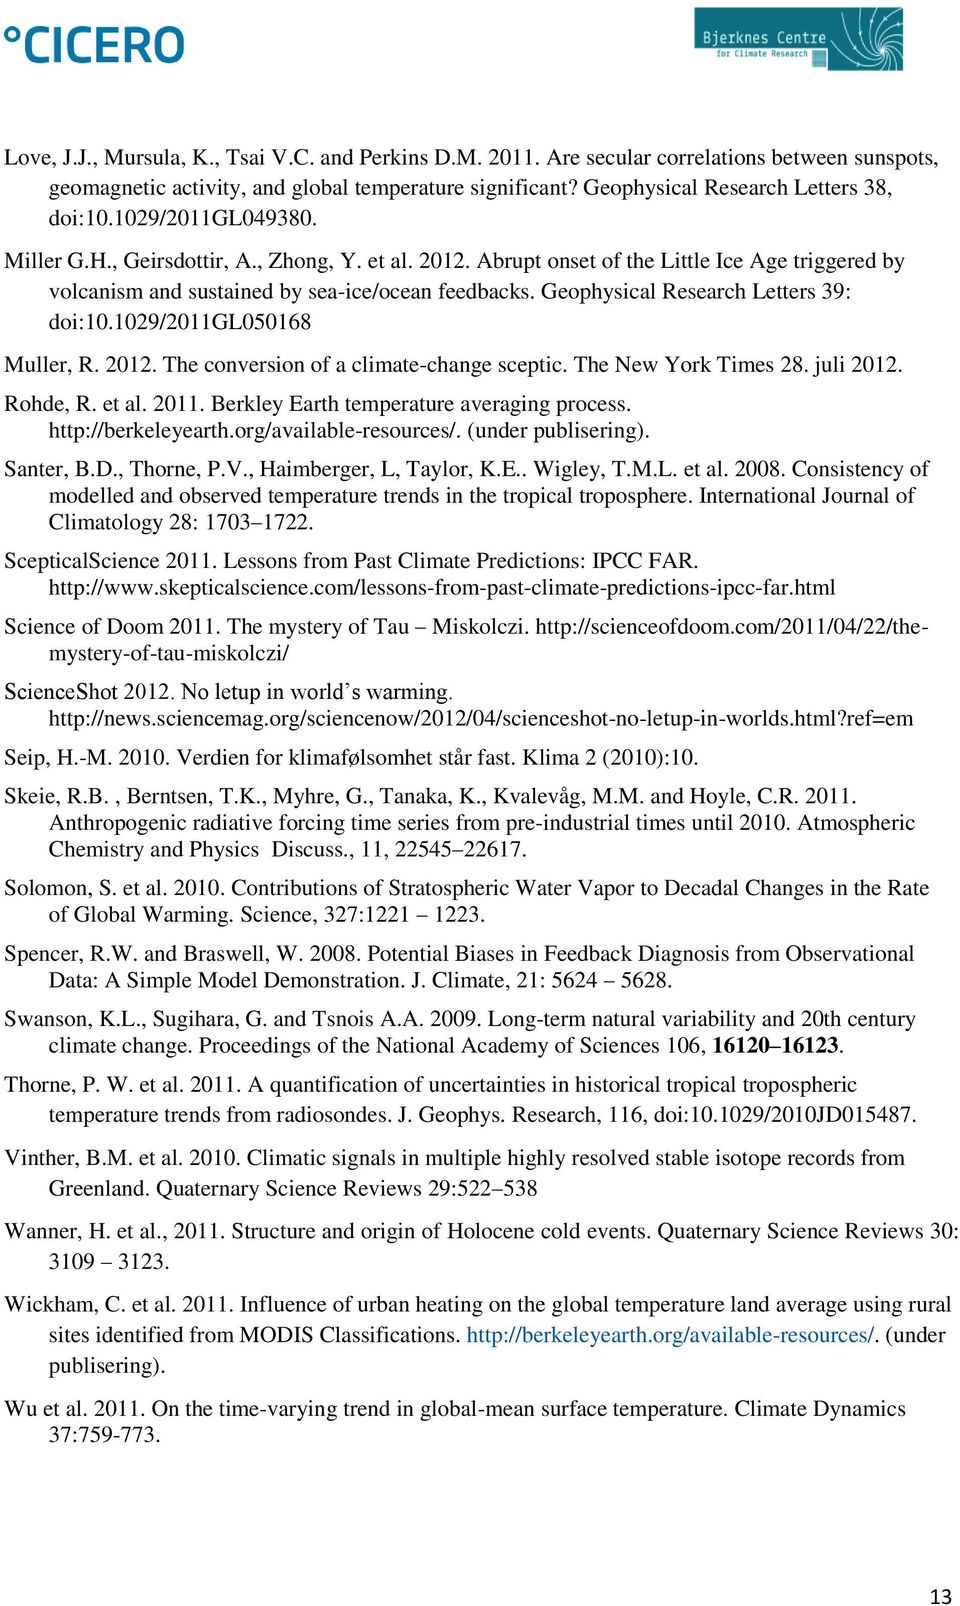 Geophysical Research Letters 39: doi:10.1029/2011gl050168 Muller, R. 2012. The conversion of a climate-change sceptic. The New York Times 28. juli 2012. Rohde, R. et al. 2011.